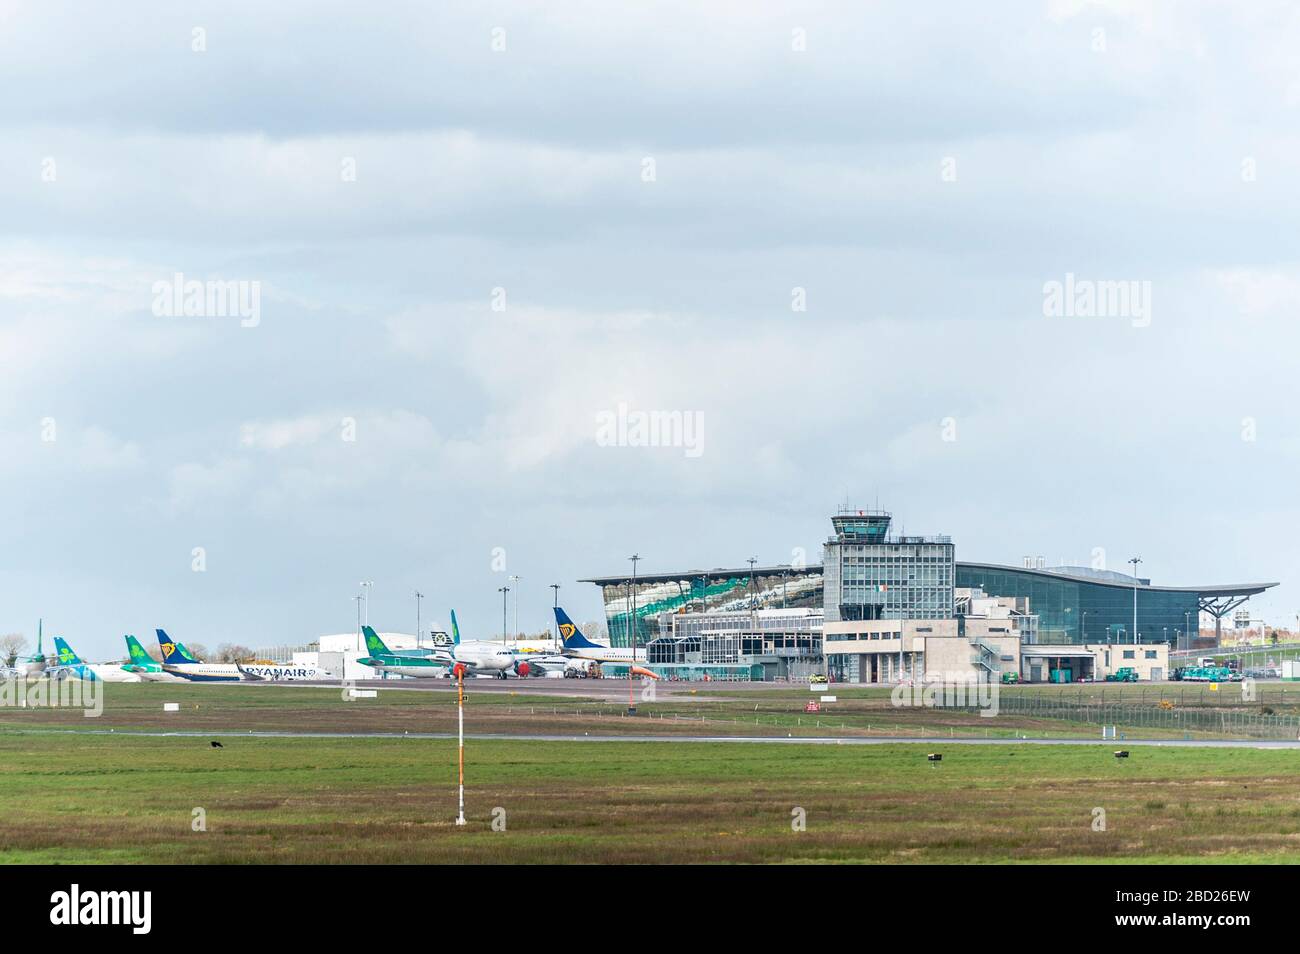 Cork, Ireland. 6th Apr, 2020. Aer Lingus and Ryanair aircraft sit grounded on the apron at Cork Airport due to the Covid-19 pandemic. All but a handful of flights from Cork have been cancelled. Credit: Andy Gibson/Alamy Live News Stock Photo